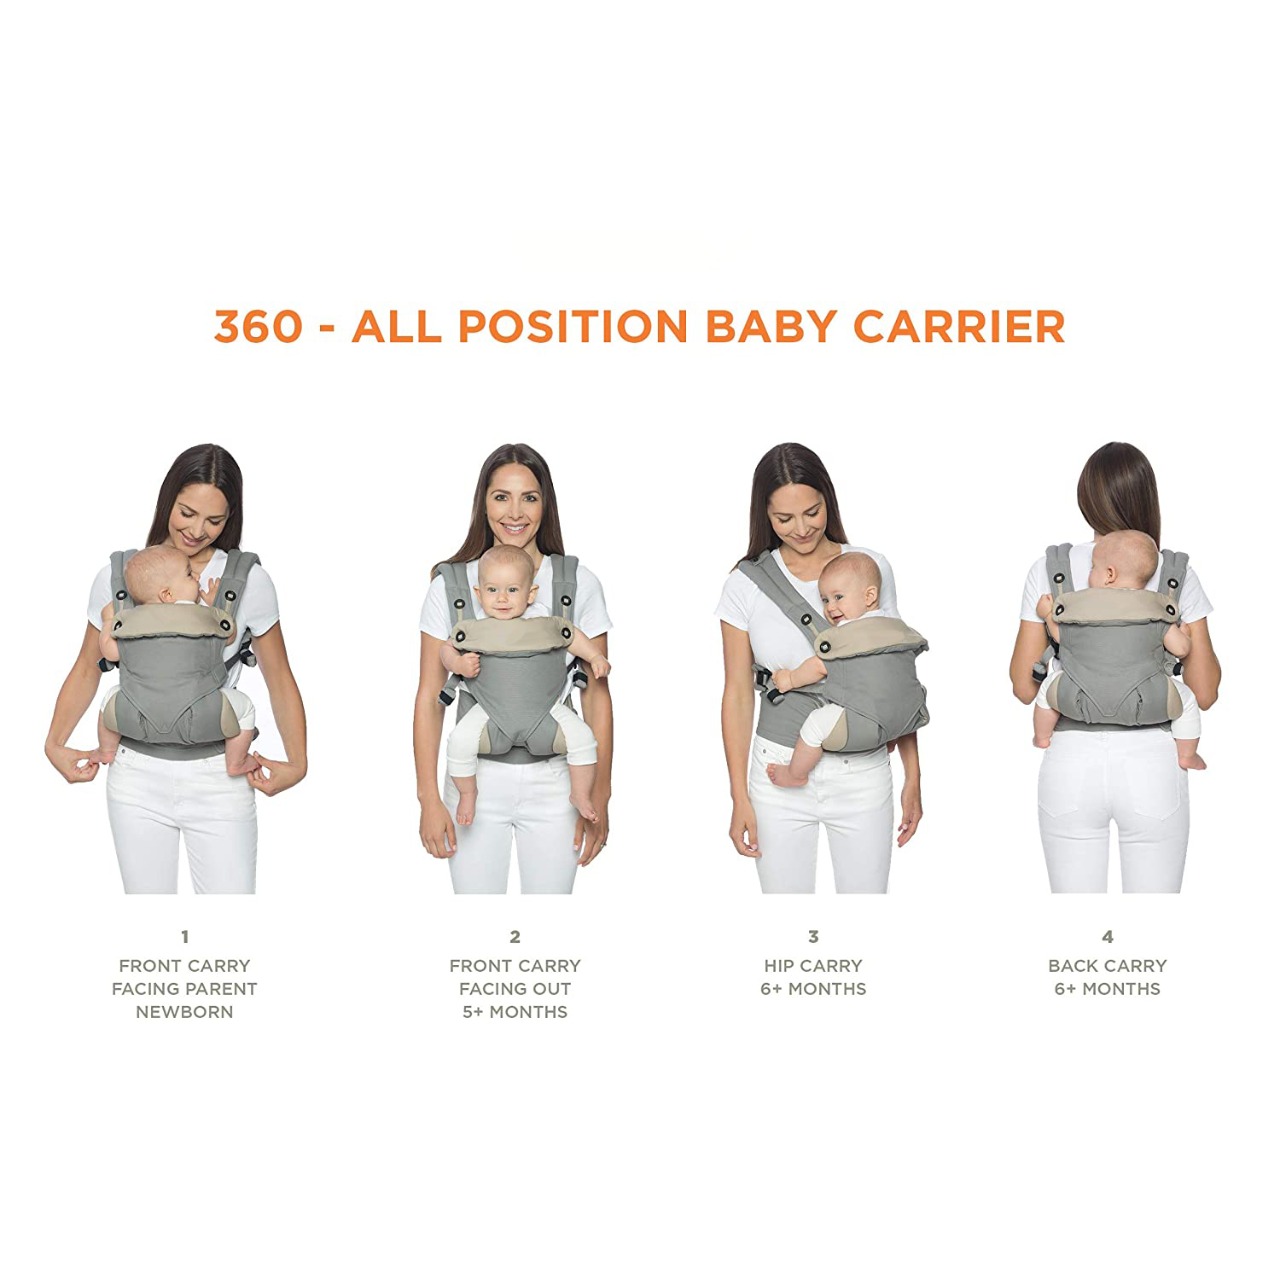 how much is ergo baby carrier